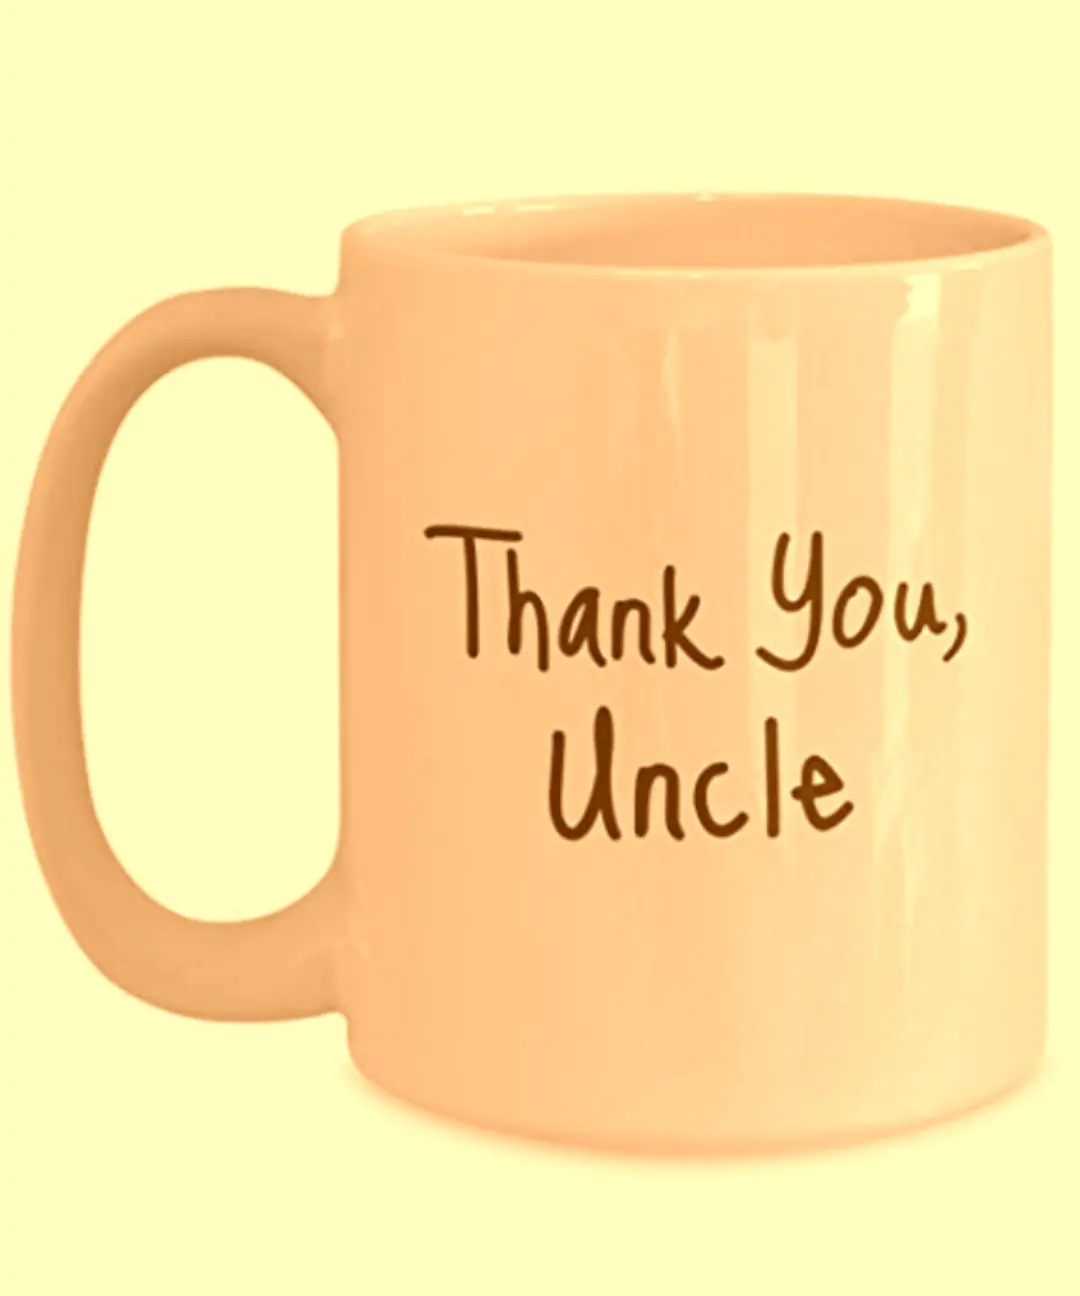 Thanks messages and quotes for uncle